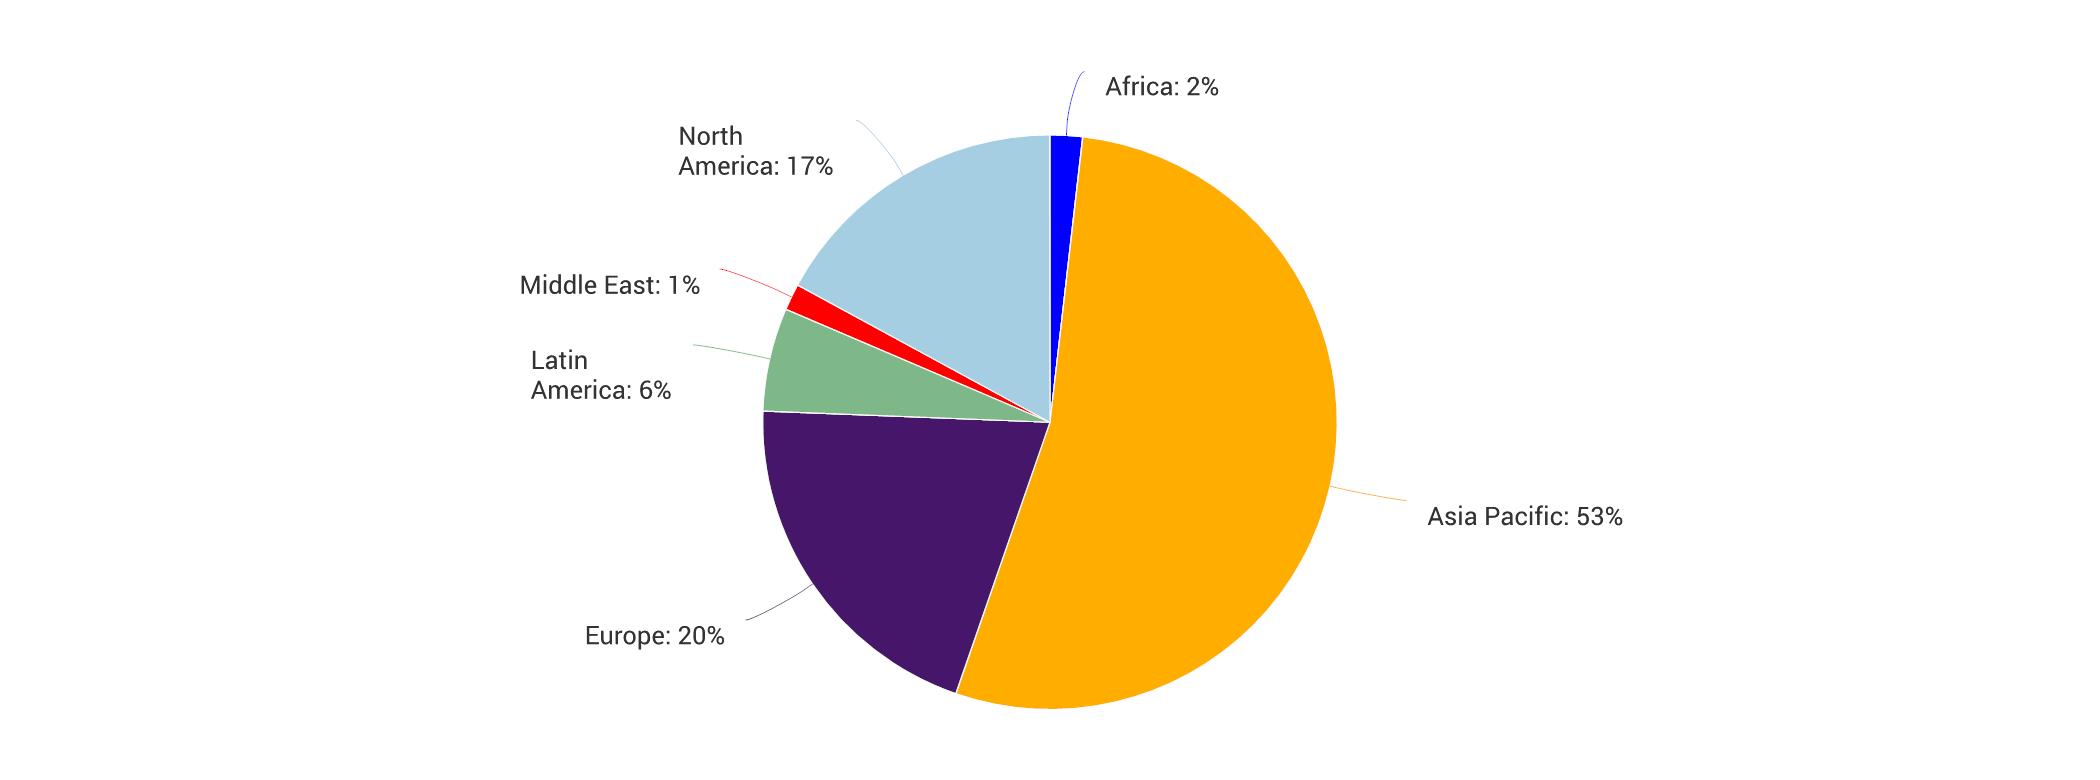 Pie graph of the global containerboard production by region.